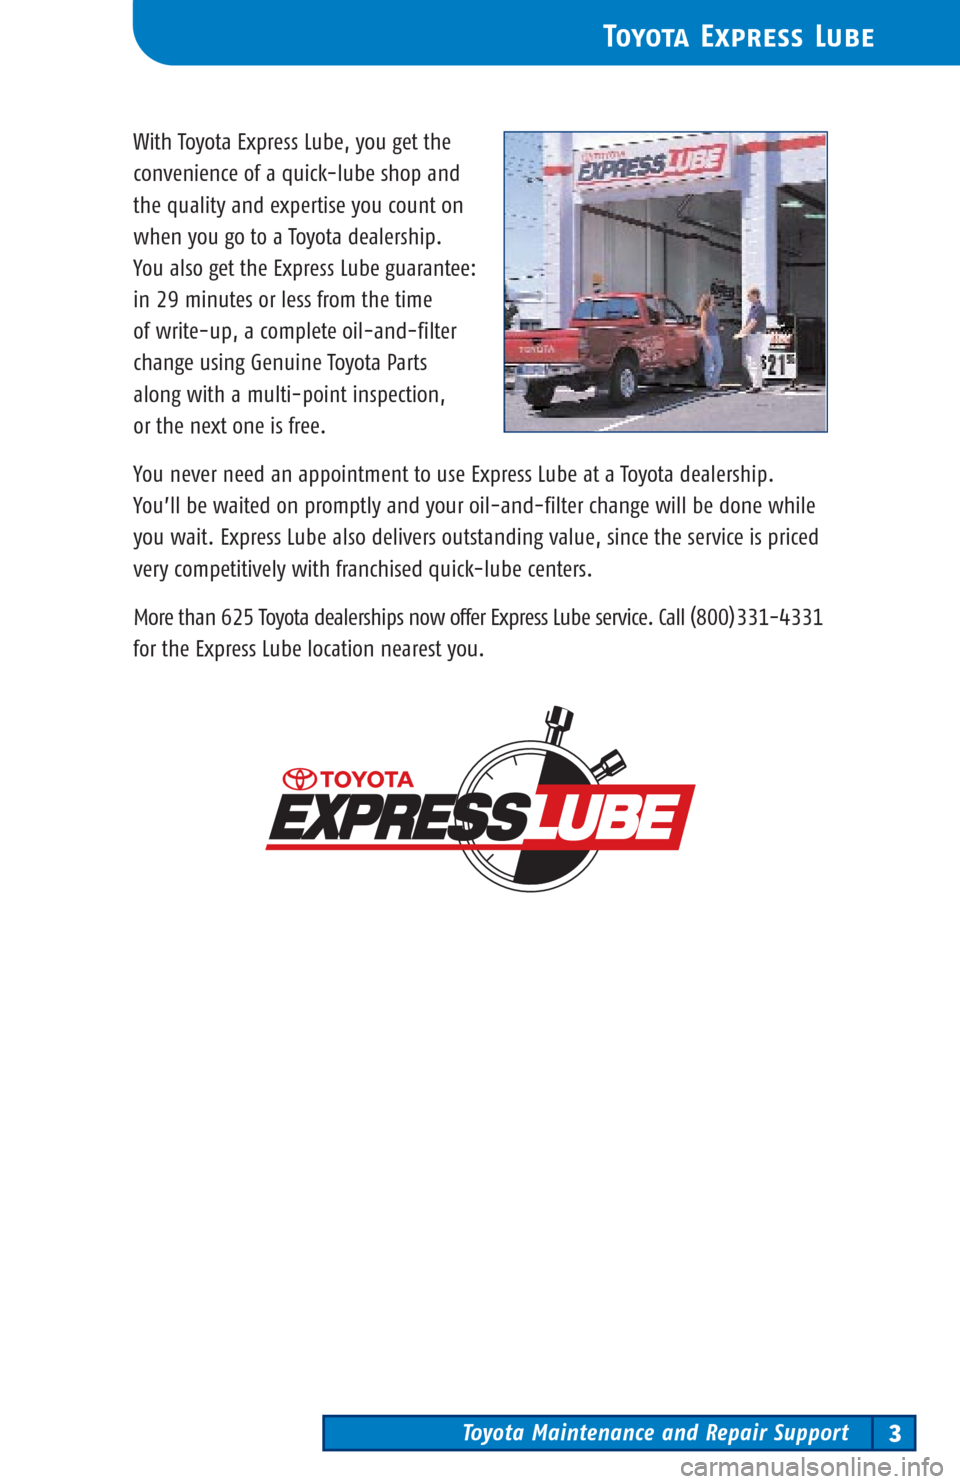 TOYOTA LAND CRUISER 2003 J100 Scheduled Maintenance Guide Toyota Maintenance and Repair Support3
Toyota Express Lube
With Toyota Express Lube, you get the
convenience of a quick-lube shop and 
the quality and expertise you count on
when you go to a Toyota de